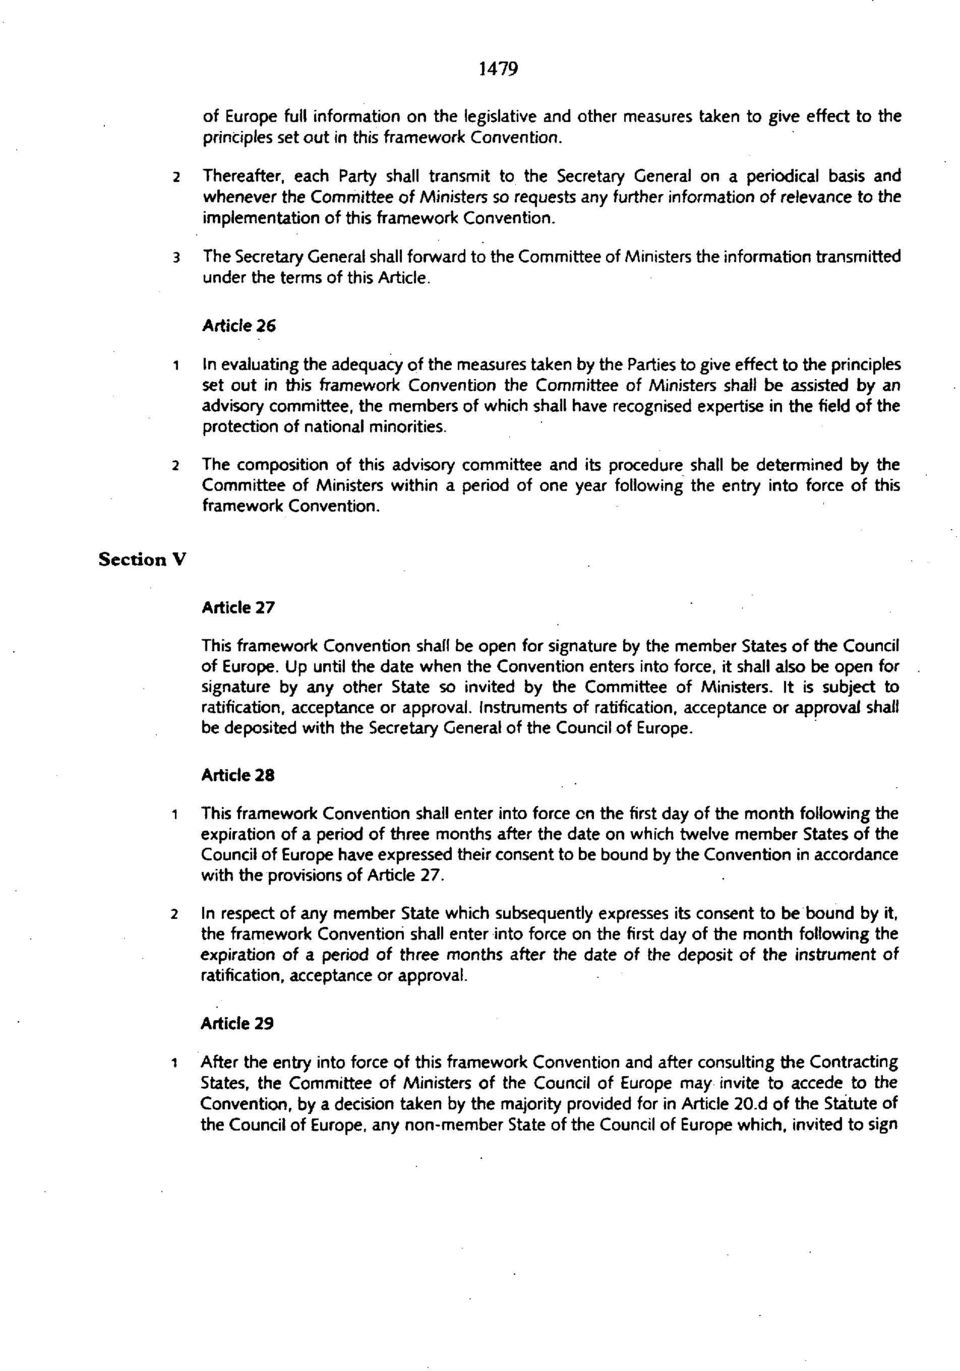 of this framework Convention. 3 The Secretary General shall forward to the Committee of Ministers the information transmitted under the terms of this Article.